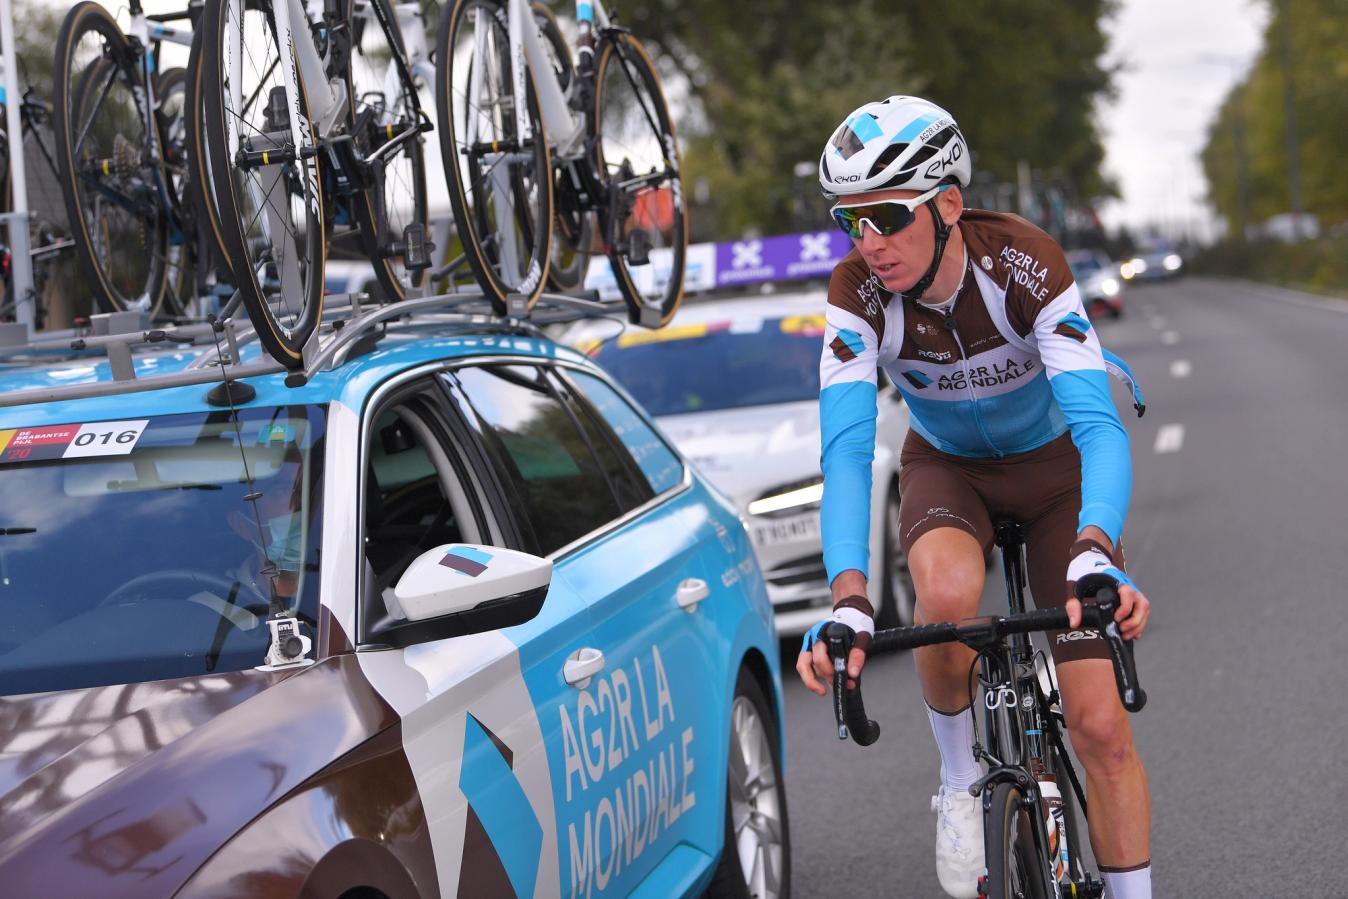 It is unlikely we will see Romain Bardet in a team car in the future